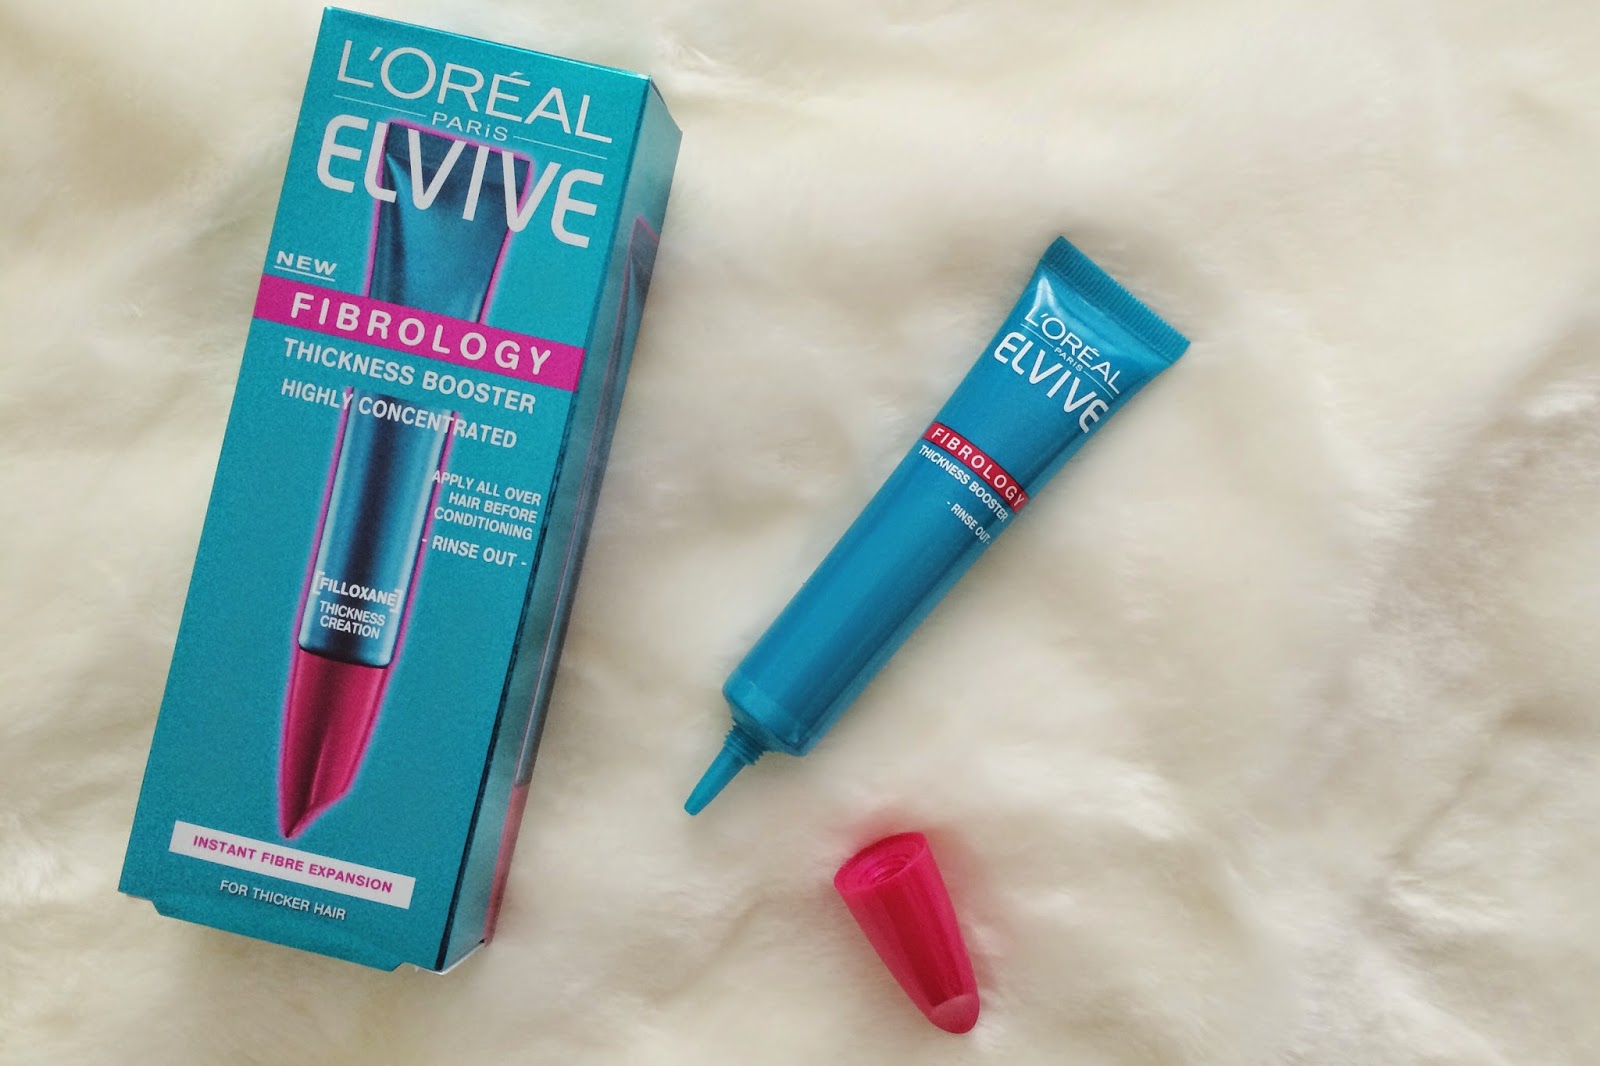 FashionFake, a UK fashion and lifestyle blog. L'Oreal Elvive Fibrology review, does the L'Oreal Elvive Fibrology mask and serum make a difference to hair thickness?